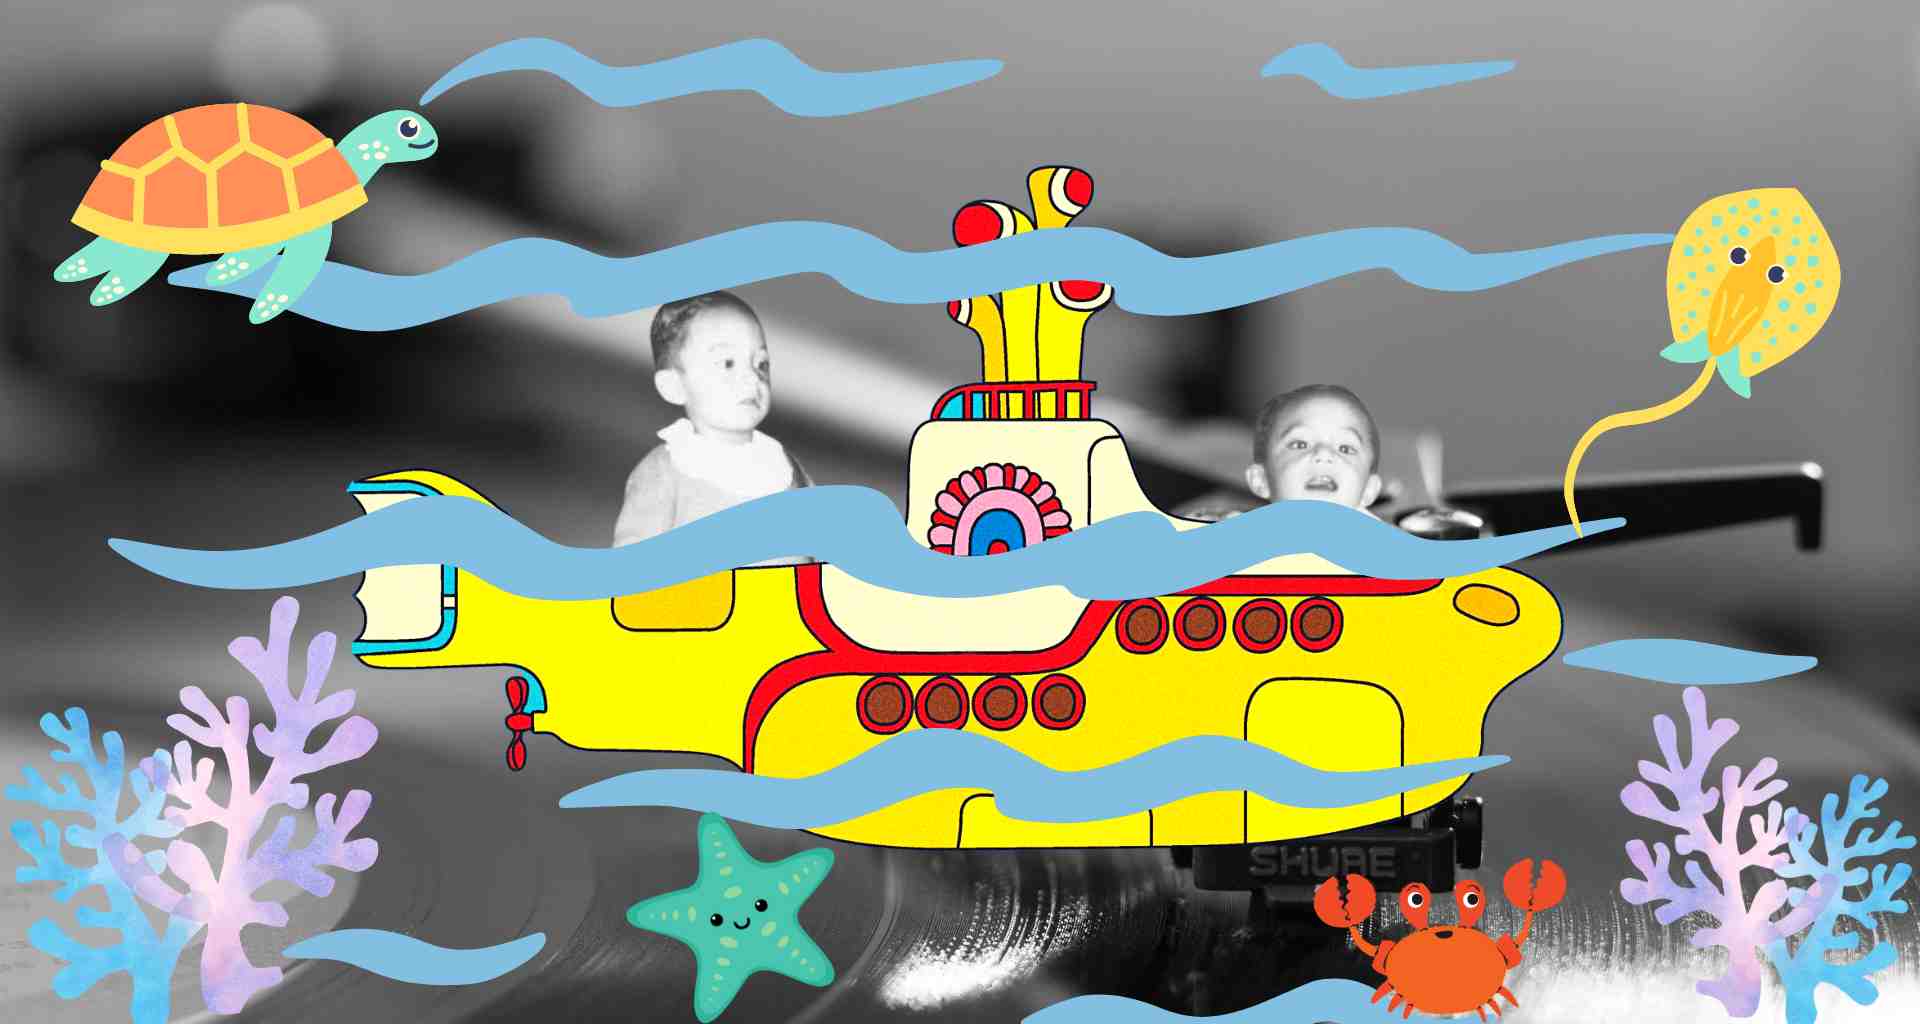 The Beatles’ Yellow Submarine record cover art with childhood pictures of the blog author superimposed on.